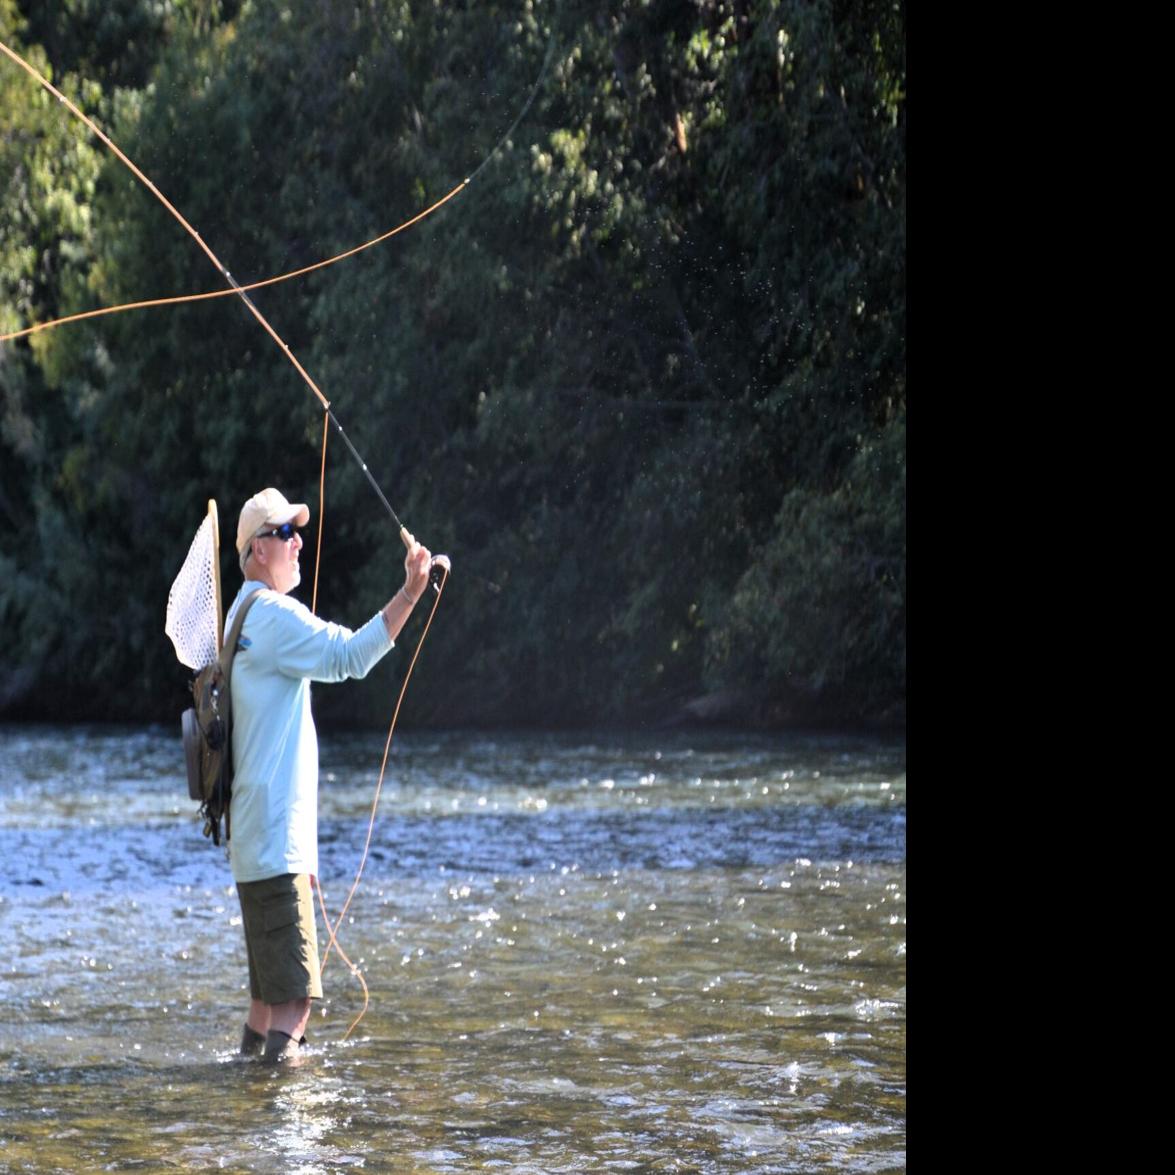 For those who serve: Project Healing Waters Fly Fishing unites